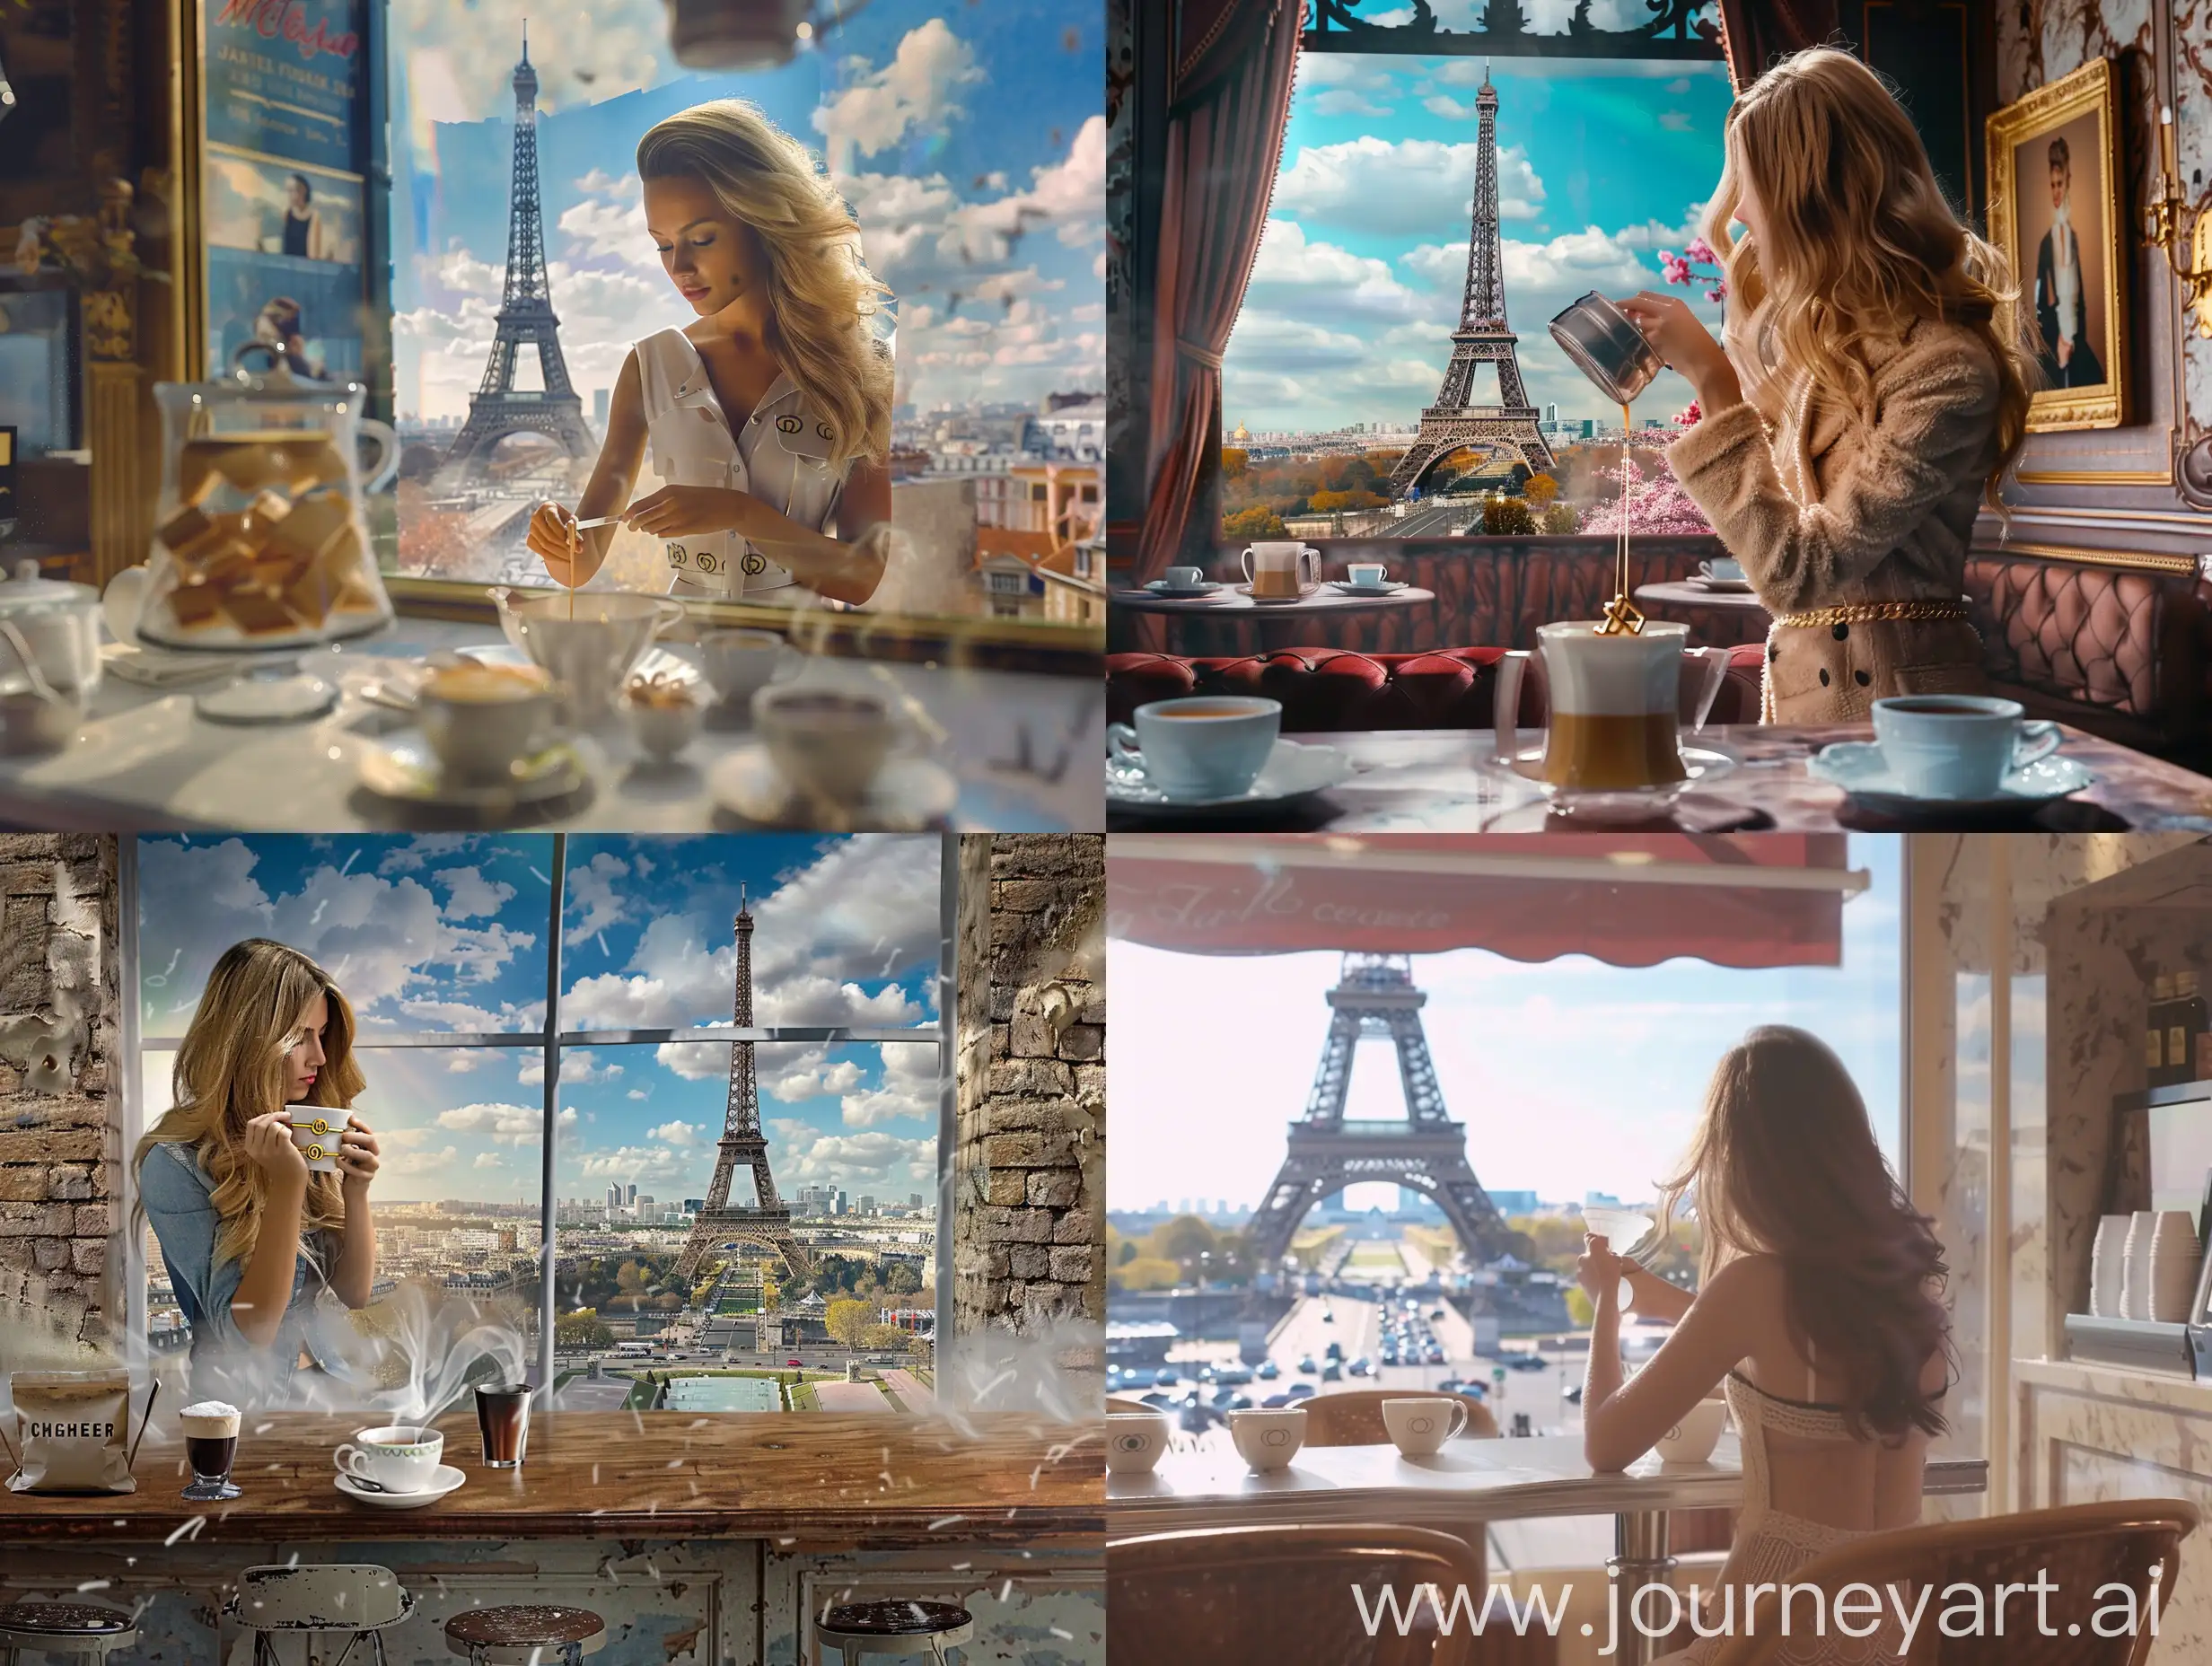 video of a woman wearing chanel stirring her coffee in a parisian coffee shop looking through the view of eiffel tower, ar 1080 pixels wide x 1920 pixels tall